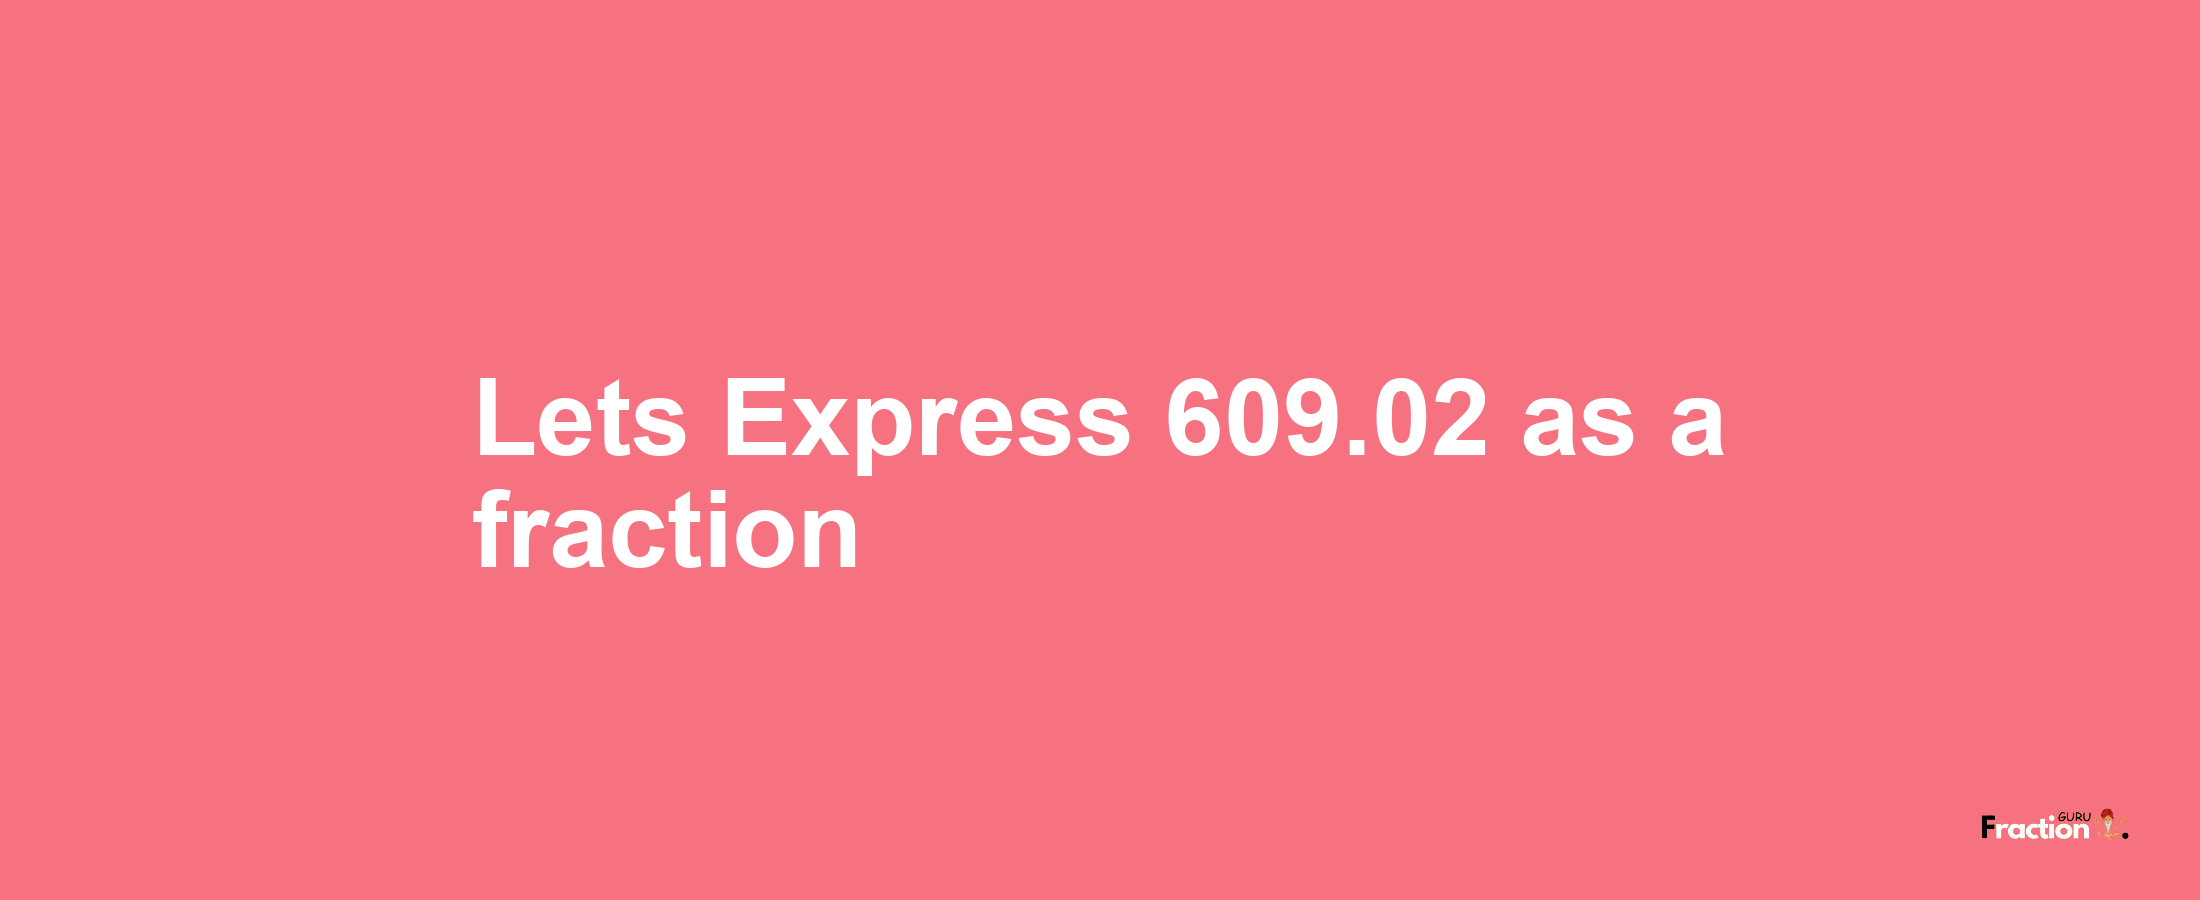 Lets Express 609.02 as afraction